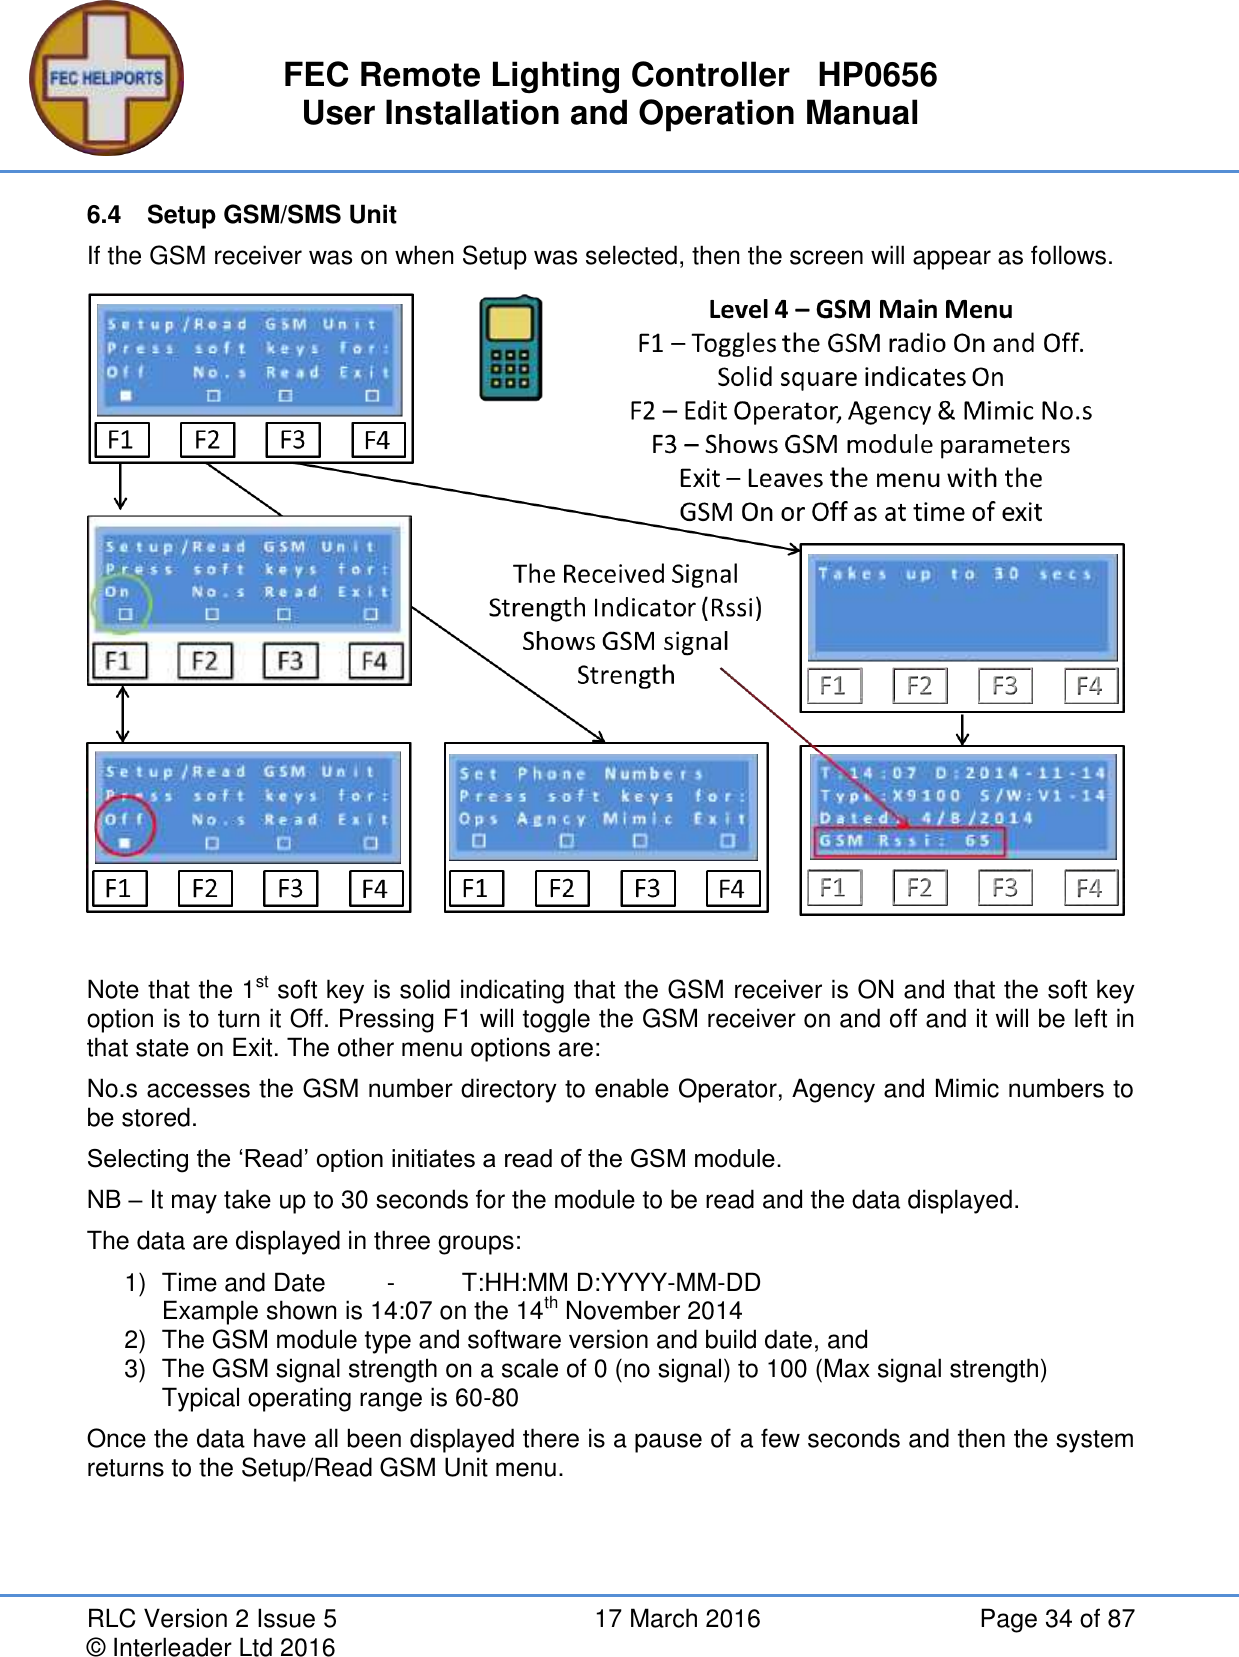 FEC Remote Lighting Controller   HP0656 User Installation and Operation Manual RLC Version 2 Issue 5  17 March 2016  Page 34 of 87 © Interleader Ltd 2016 6.4  Setup GSM/SMS Unit If the GSM receiver was on when Setup was selected, then the screen will appear as follows.   Note that the 1st soft key is solid indicating that the GSM receiver is ON and that the soft key option is to turn it Off. Pressing F1 will toggle the GSM receiver on and off and it will be left in that state on Exit. The other menu options are: No.s accesses the GSM number directory to enable Operator, Agency and Mimic numbers to be stored. Selecting the ‘Read’ option initiates a read of the GSM module. NB – It may take up to 30 seconds for the module to be read and the data displayed. The data are displayed in three groups: 1)  Time and Date  -  T:HH:MM D:YYYY-MM-DD Example shown is 14:07 on the 14th November 2014 2)  The GSM module type and software version and build date, and 3)  The GSM signal strength on a scale of 0 (no signal) to 100 (Max signal strength) Typical operating range is 60-80 Once the data have all been displayed there is a pause of a few seconds and then the system returns to the Setup/Read GSM Unit menu.   